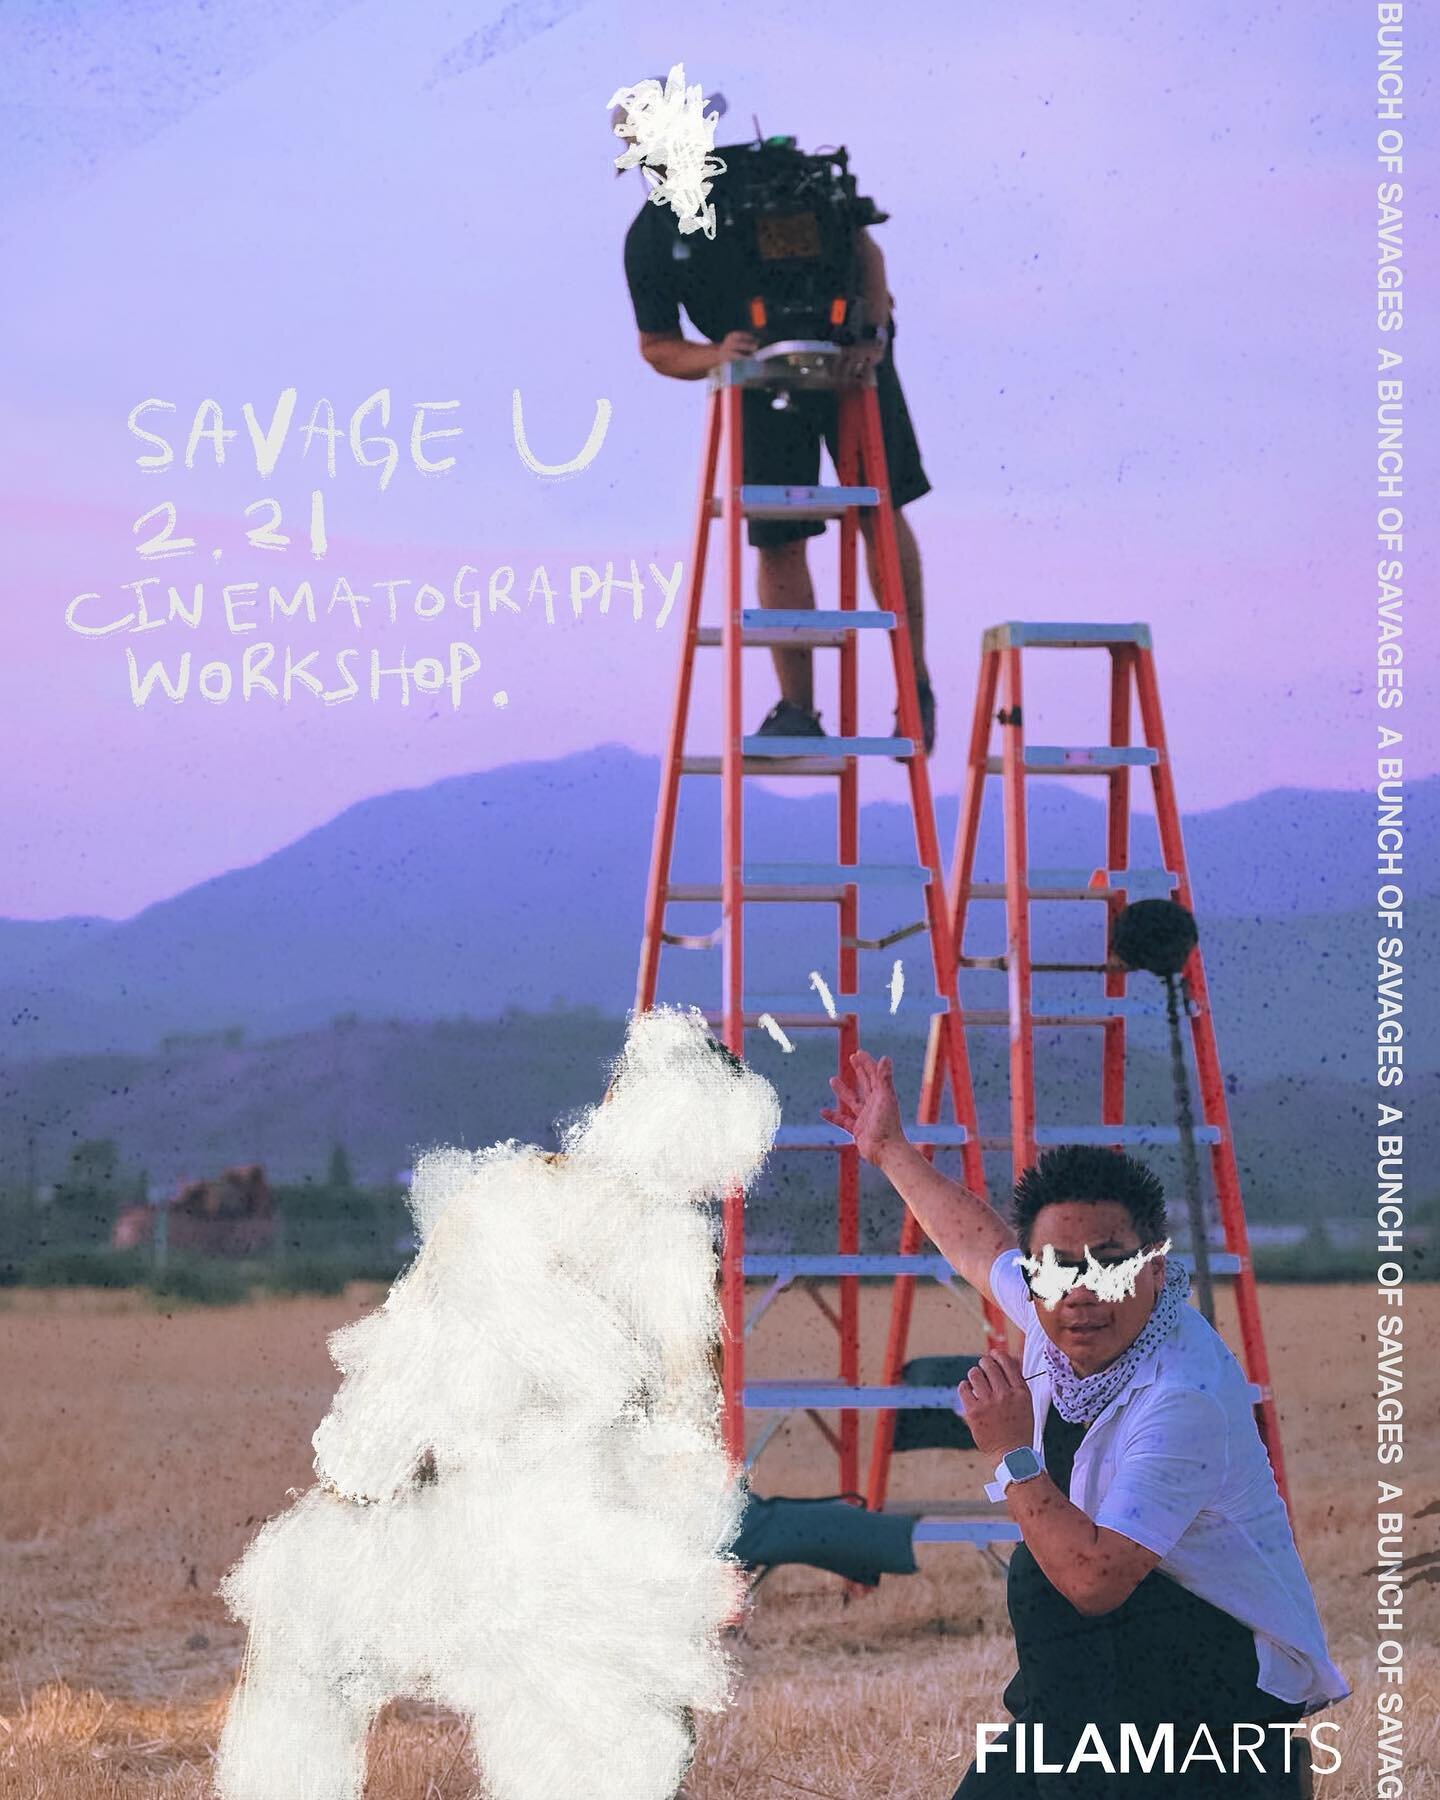 Whether you're a DP looking to develop your skills or a director learning to communicate your vision, this one's yours. For this interactive installment of Savage U, co-presented with our friends at @filamartsla , we're taking you through the basics 